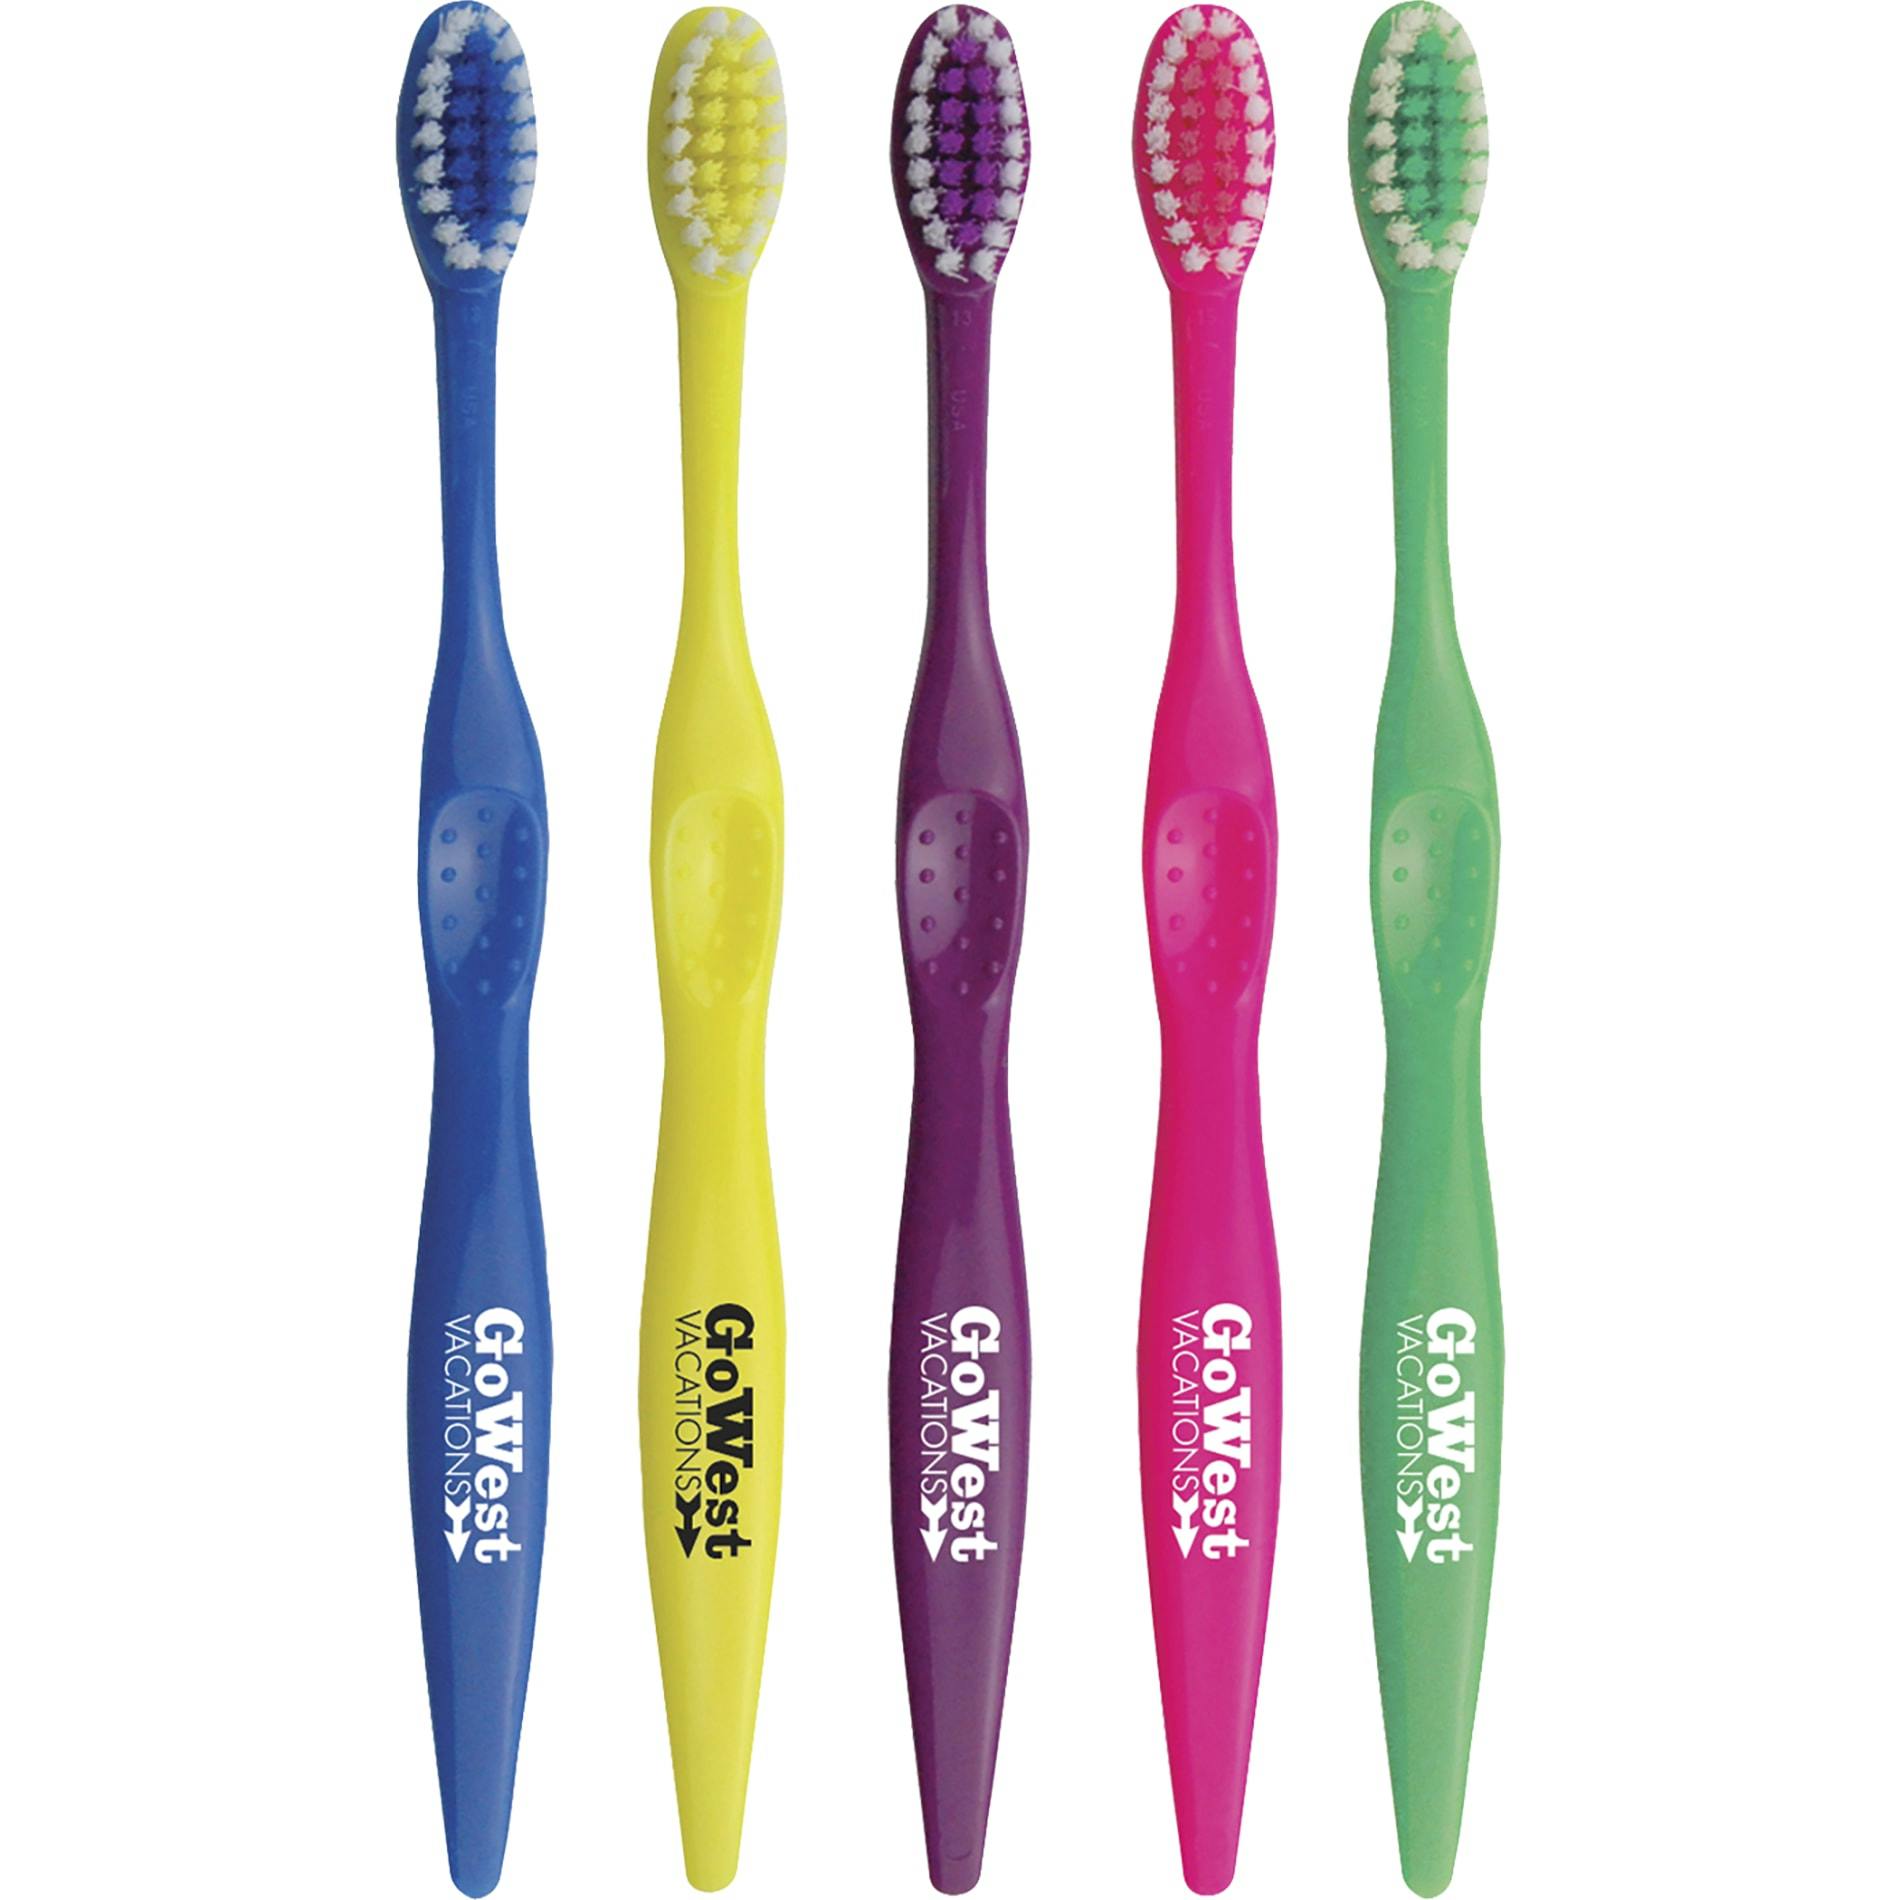 Concept Junior Toothbrush - additional Image 2